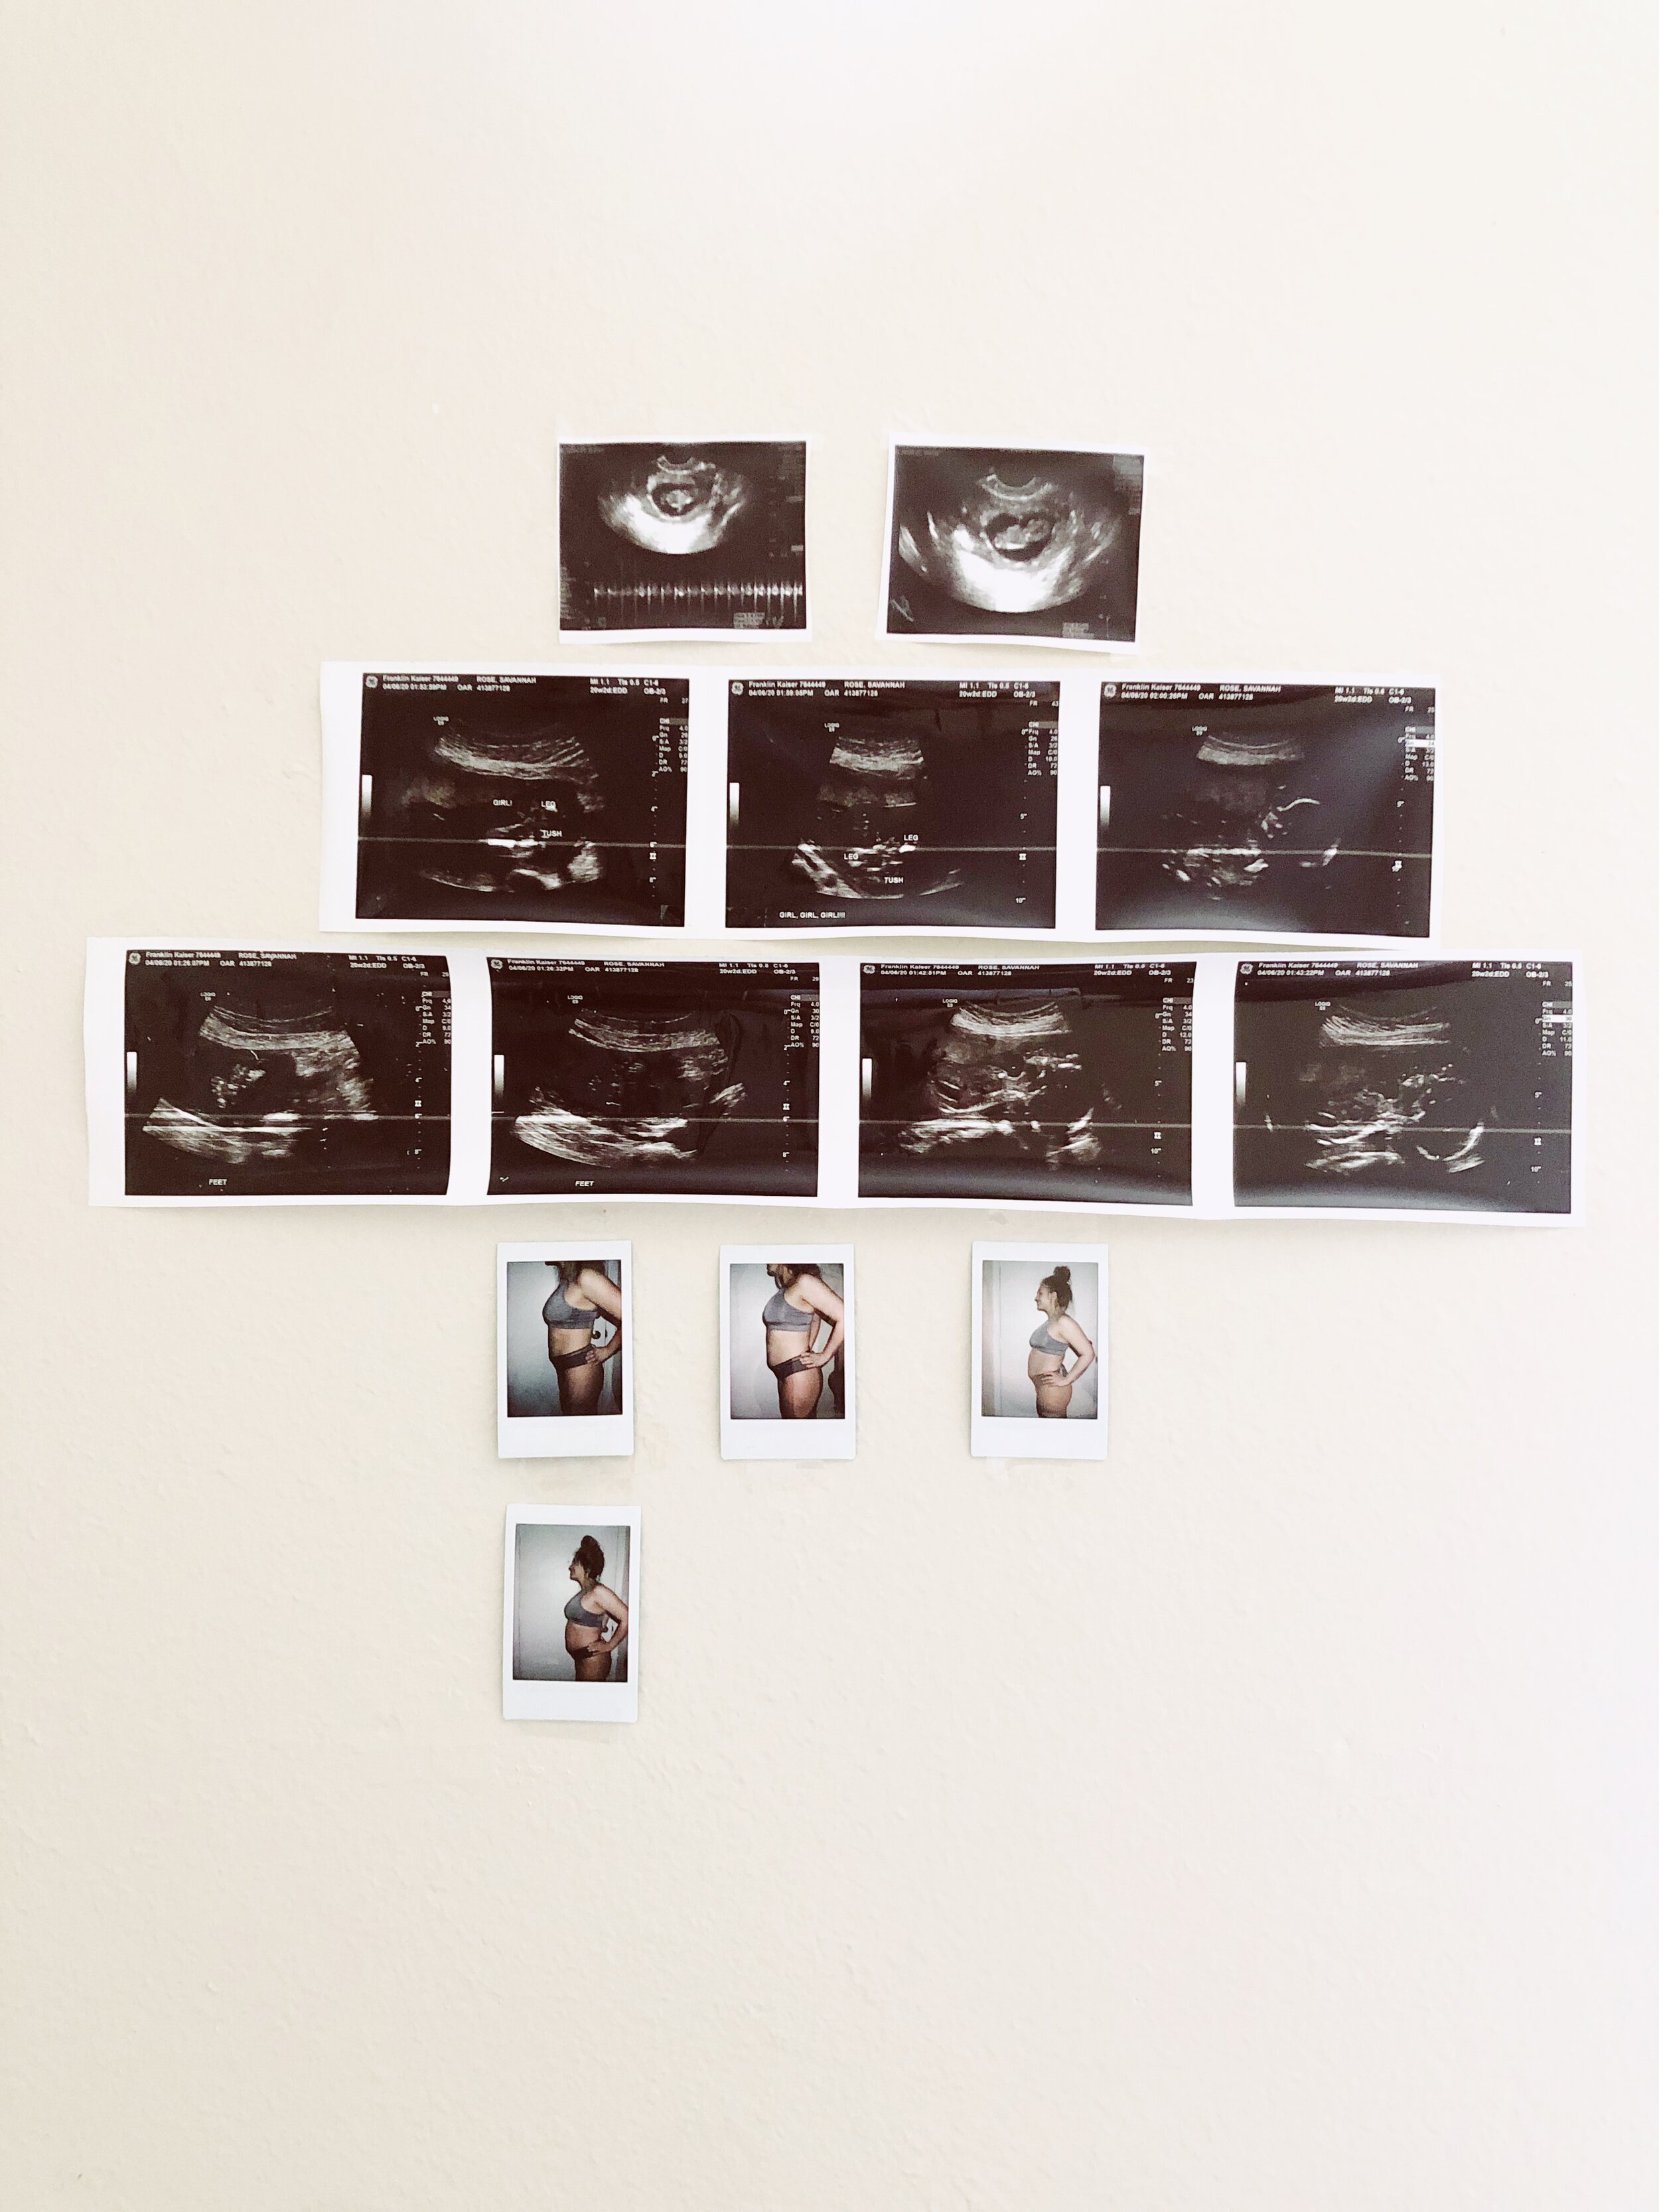 Baby Wong : Second Trimester | SaltWaterVibes